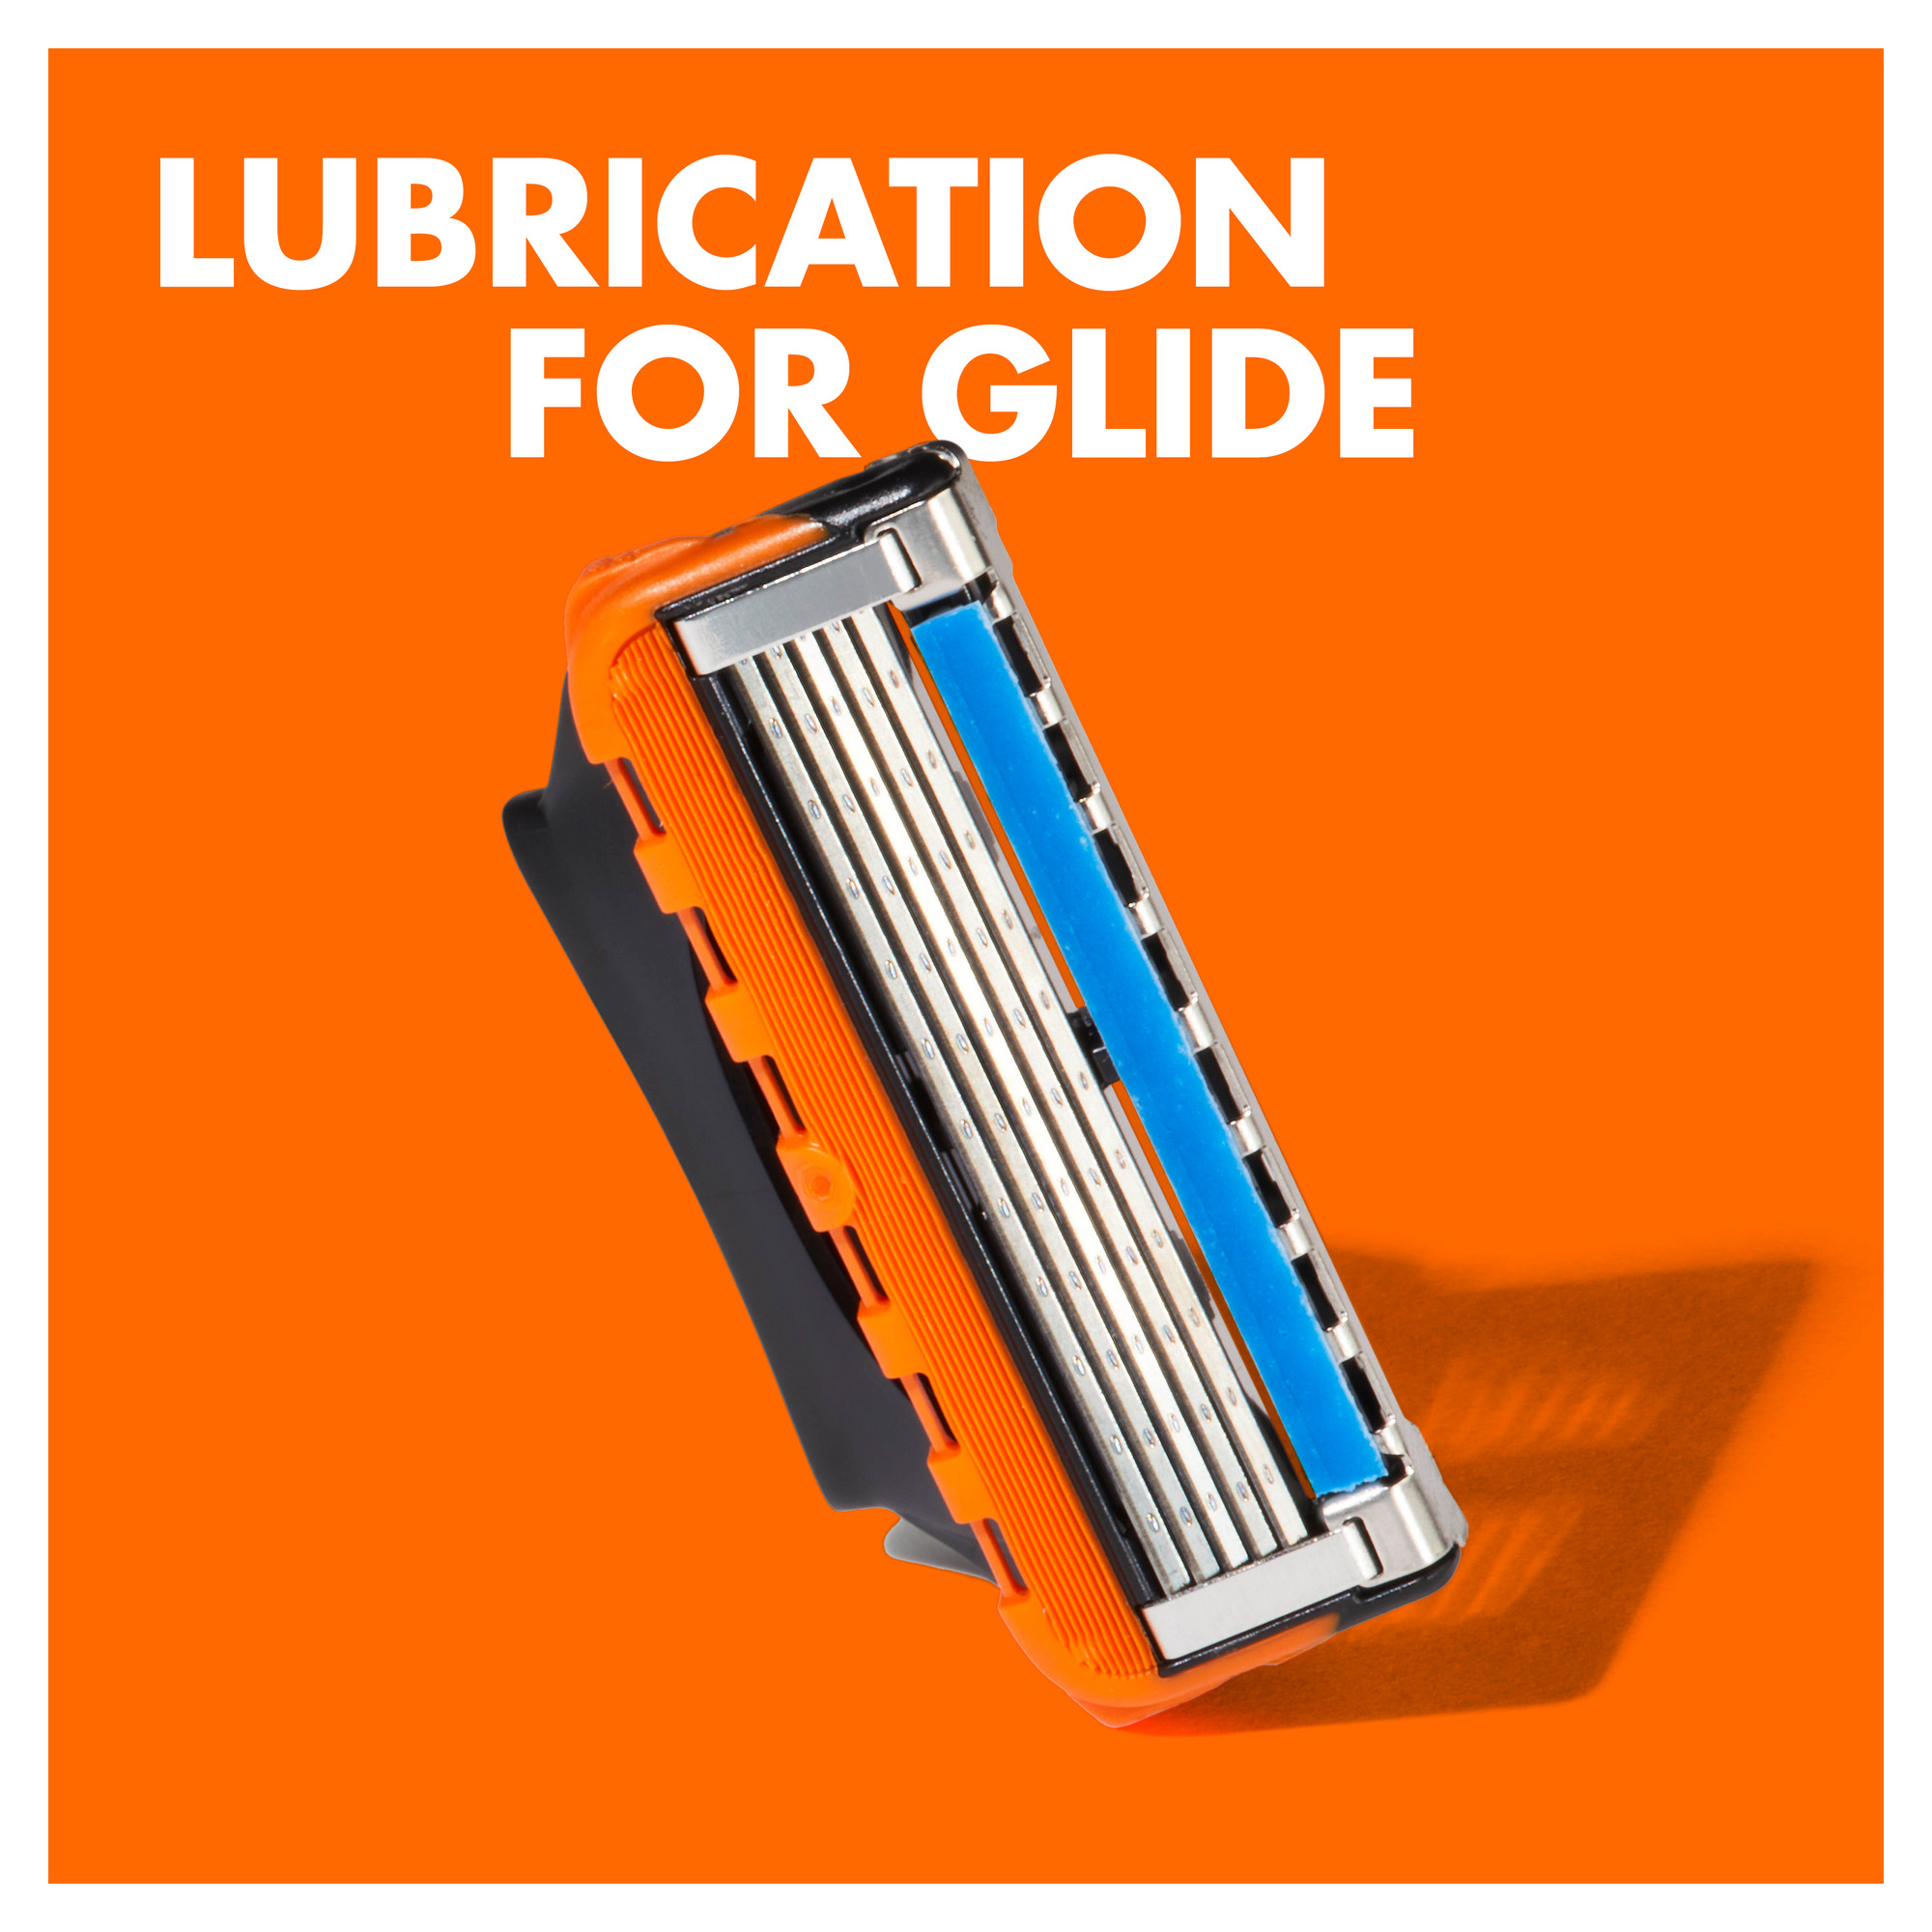 Lubrication for glide